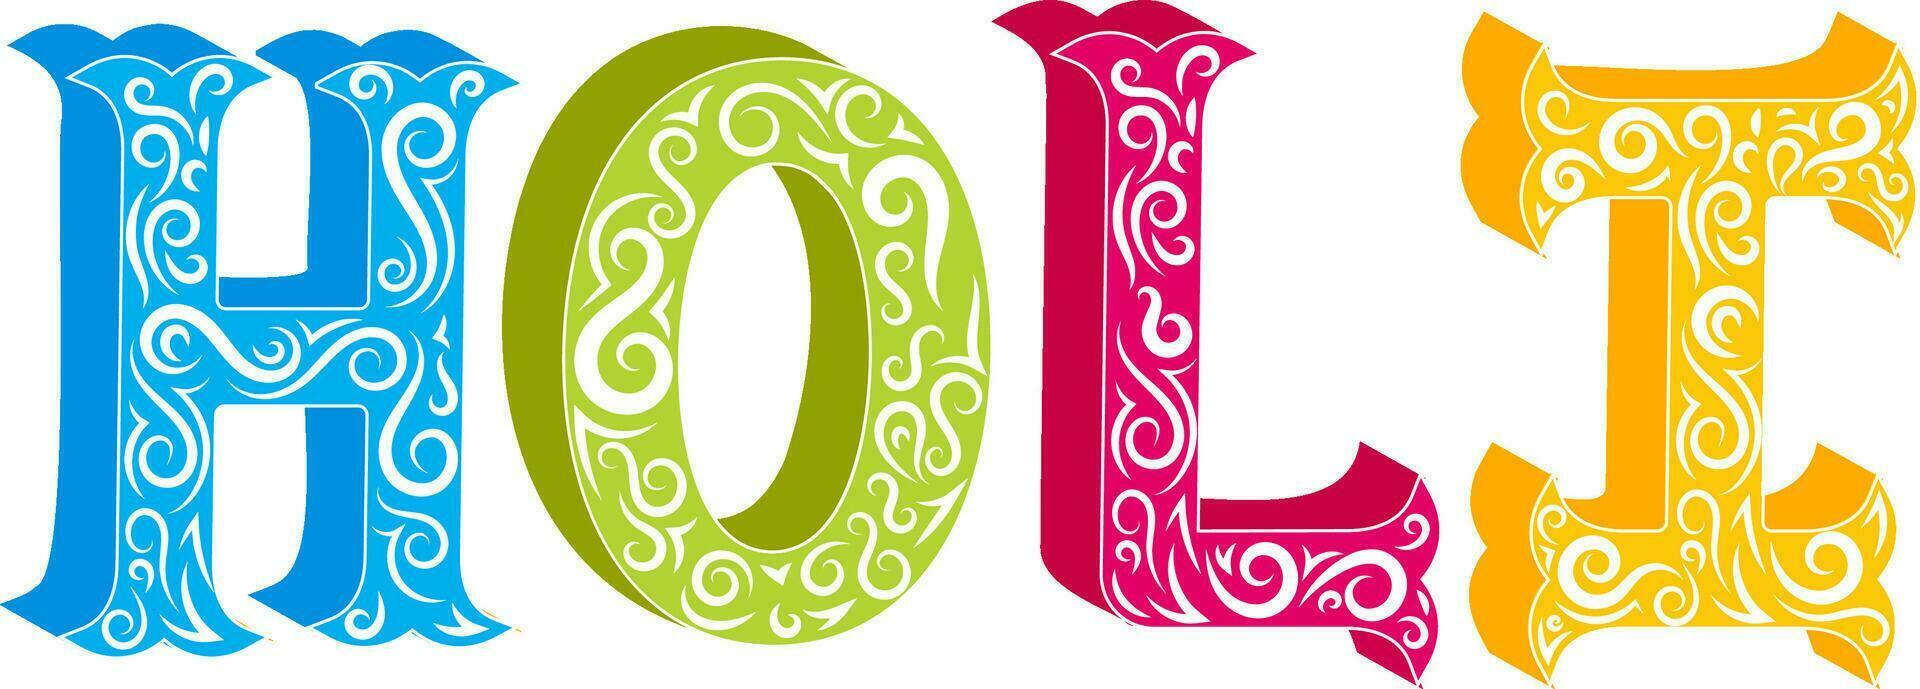 Floral Font Of Holi Colorful Text On White Background. vector